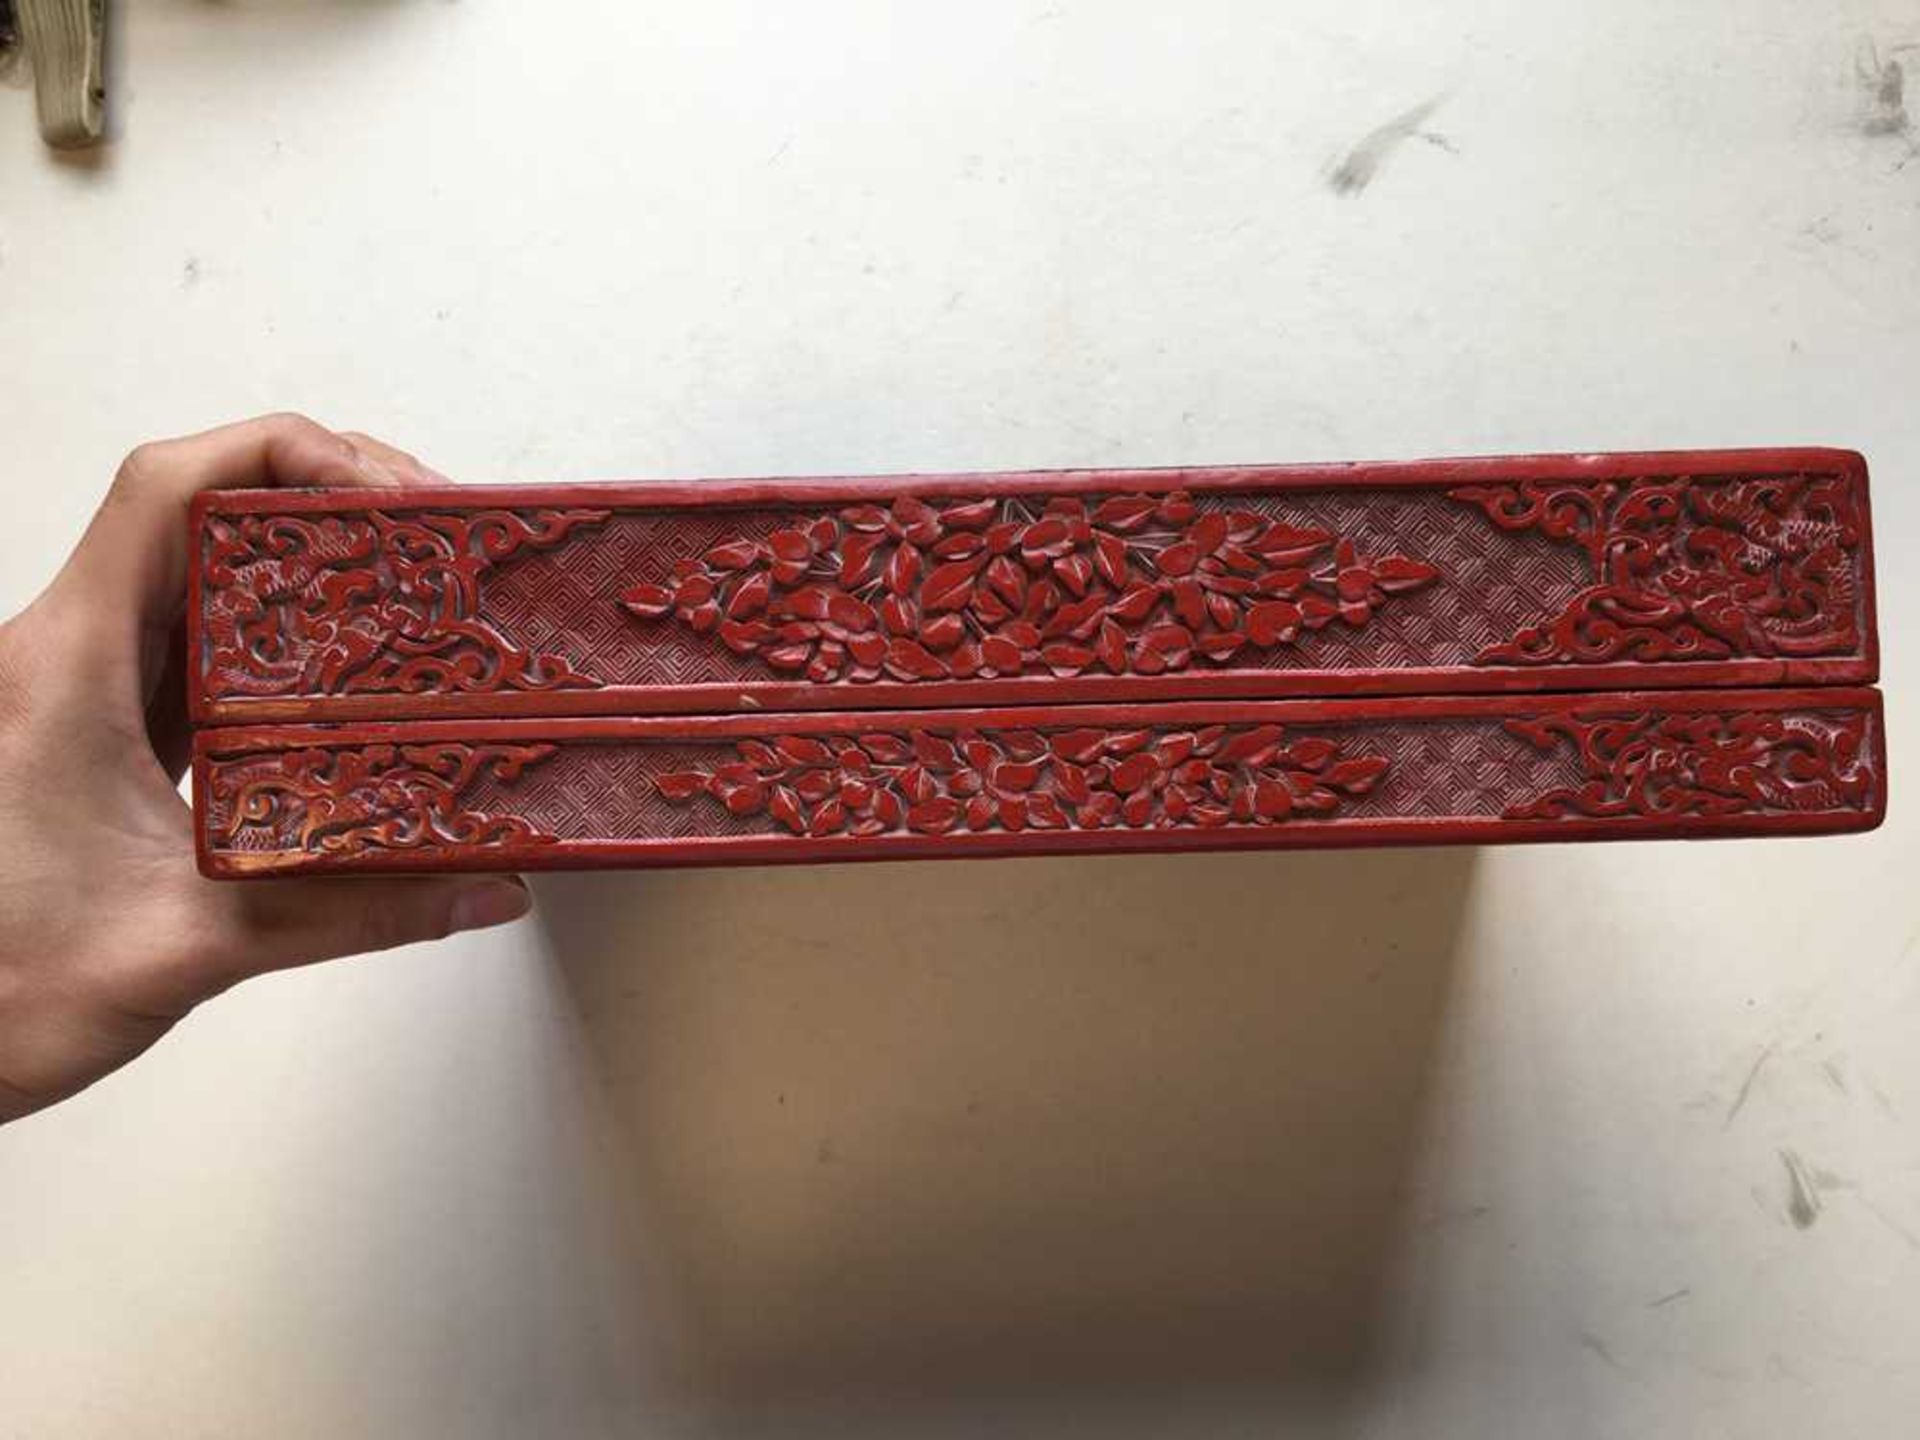 CARVED CINNABAR LACQUER RECTANGULAR BOX AND COVER QING DYNASTY, 19TH CENTURY - Image 10 of 16